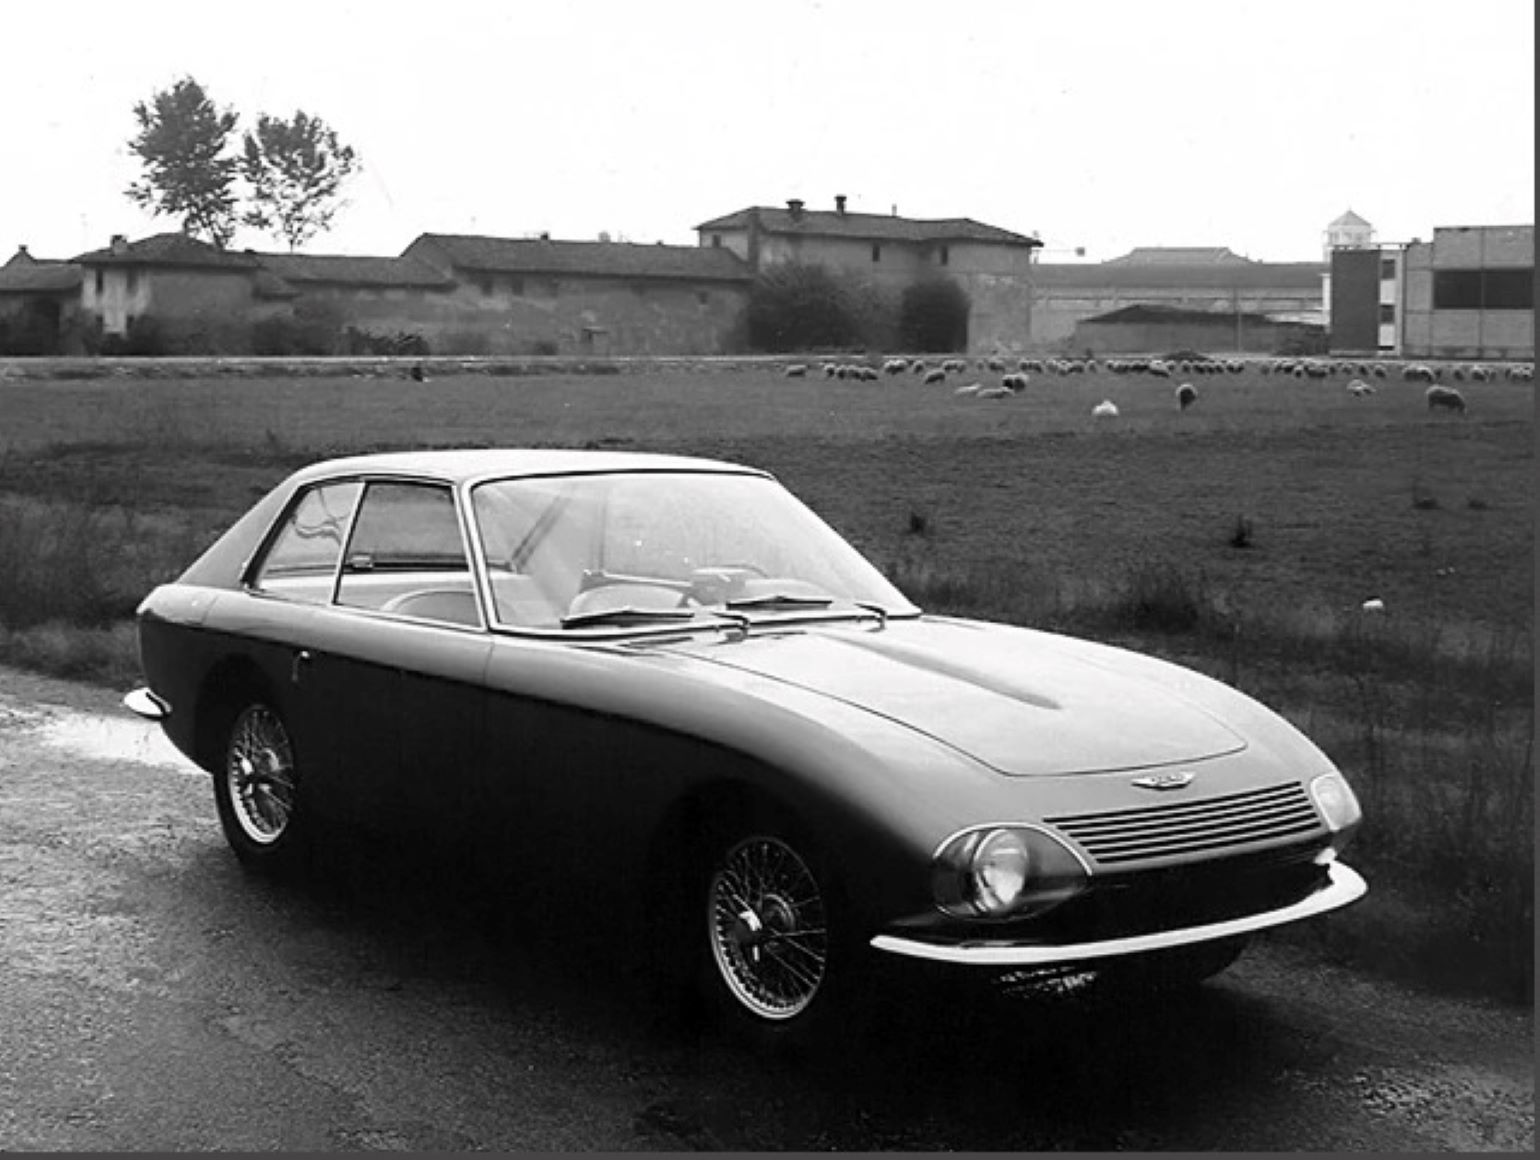 Name:  AH 3000 #2121 AH 3000 Coupe Pininfarina photo front 3-4 arch Classic and Recreation Sportscars.jpg
Views: 215
Size:  171.0 KB